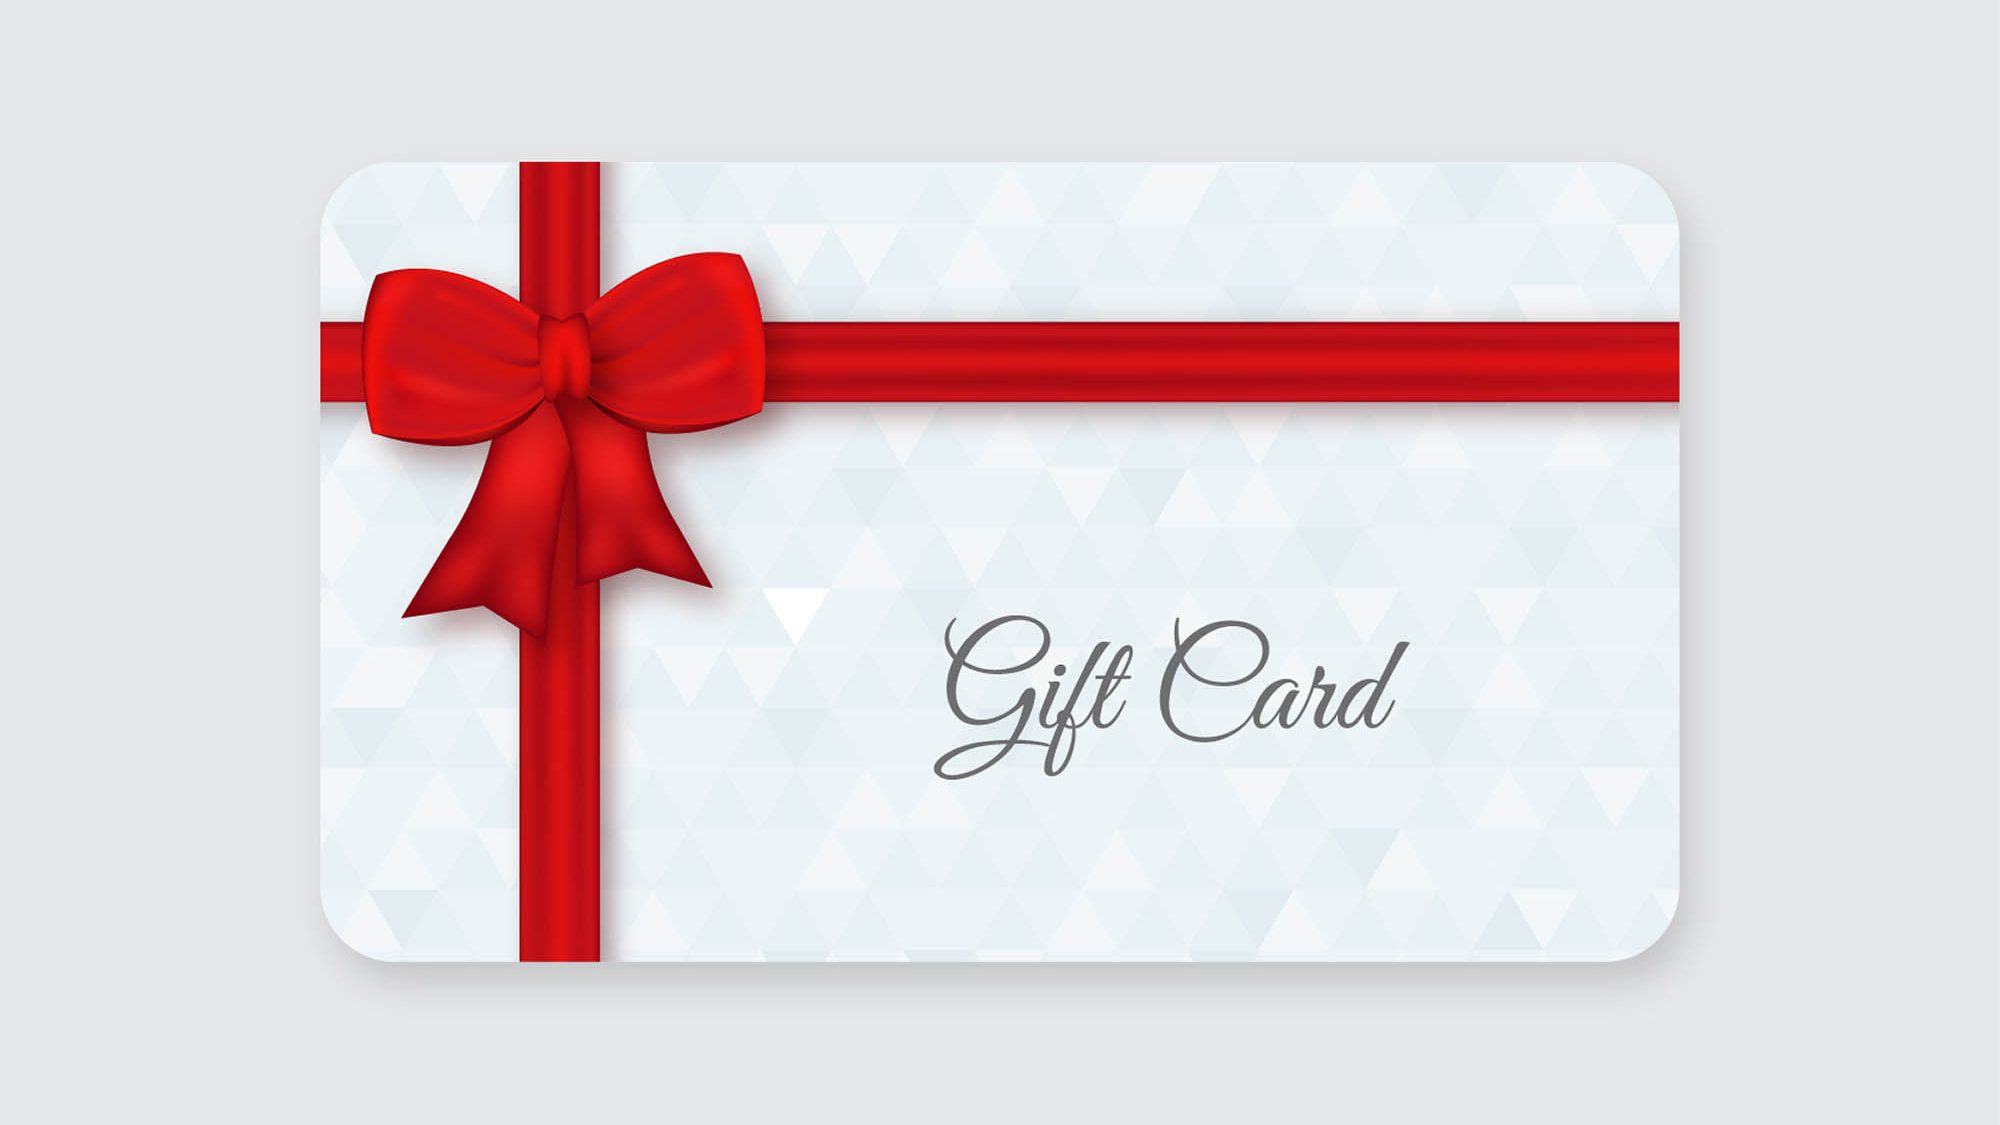 The Date Room Gift Card - Flexible Corporate Gift Option in Dubai